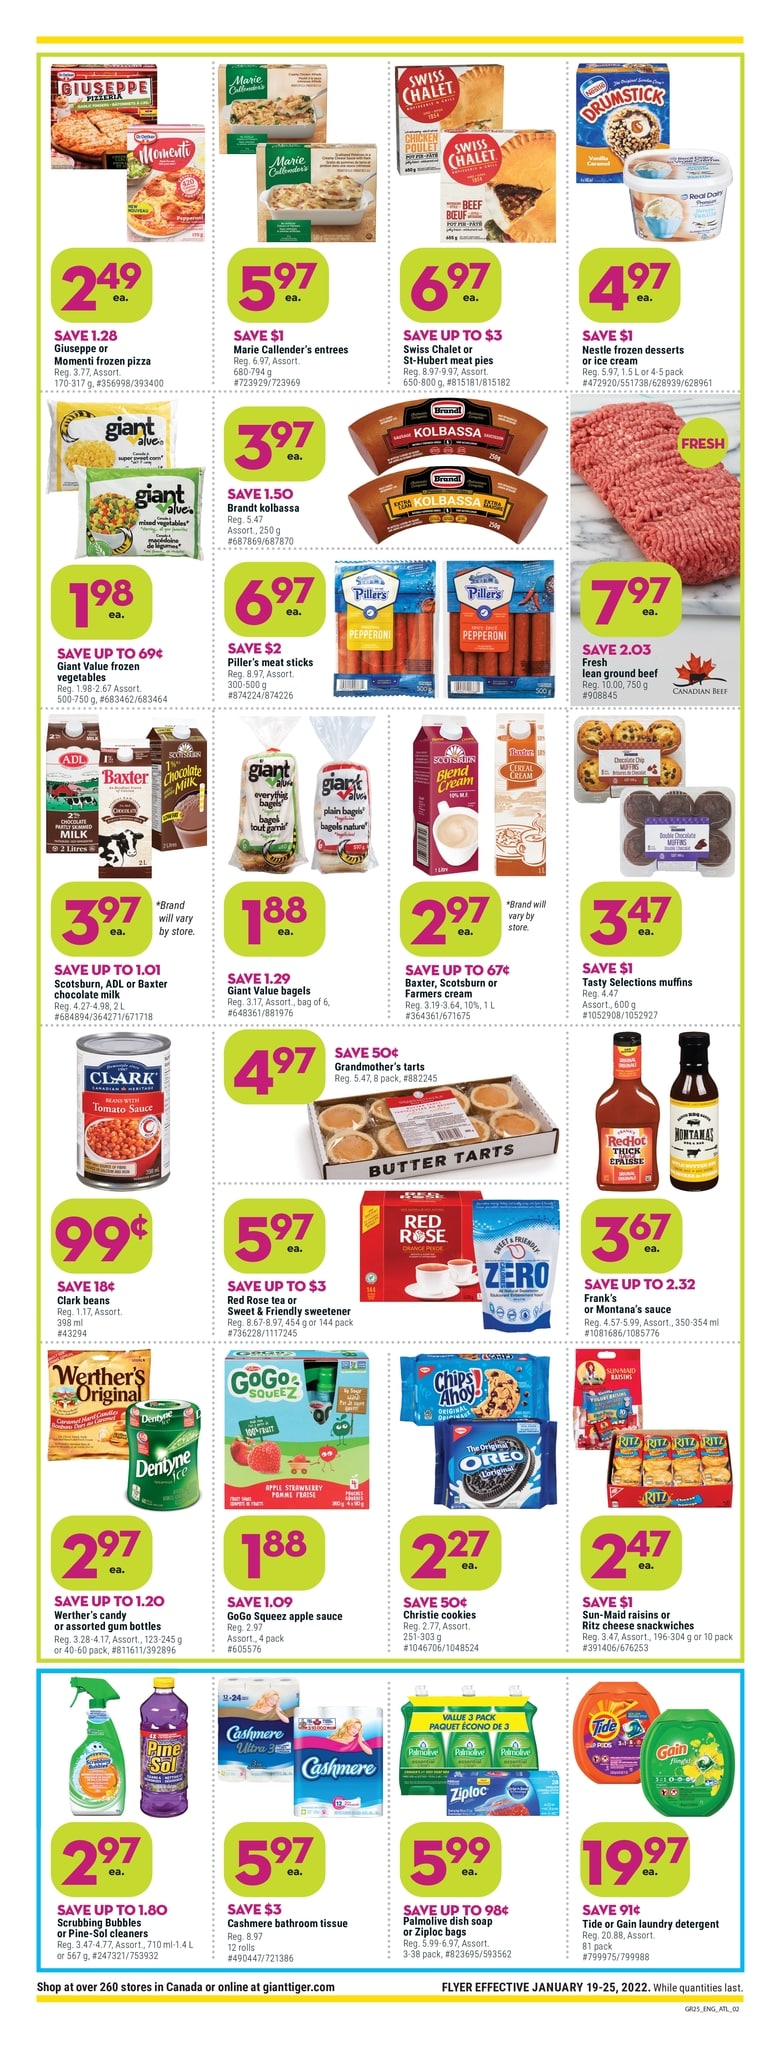 Giant Tiger - Weekly Flyer Specials - Page 3